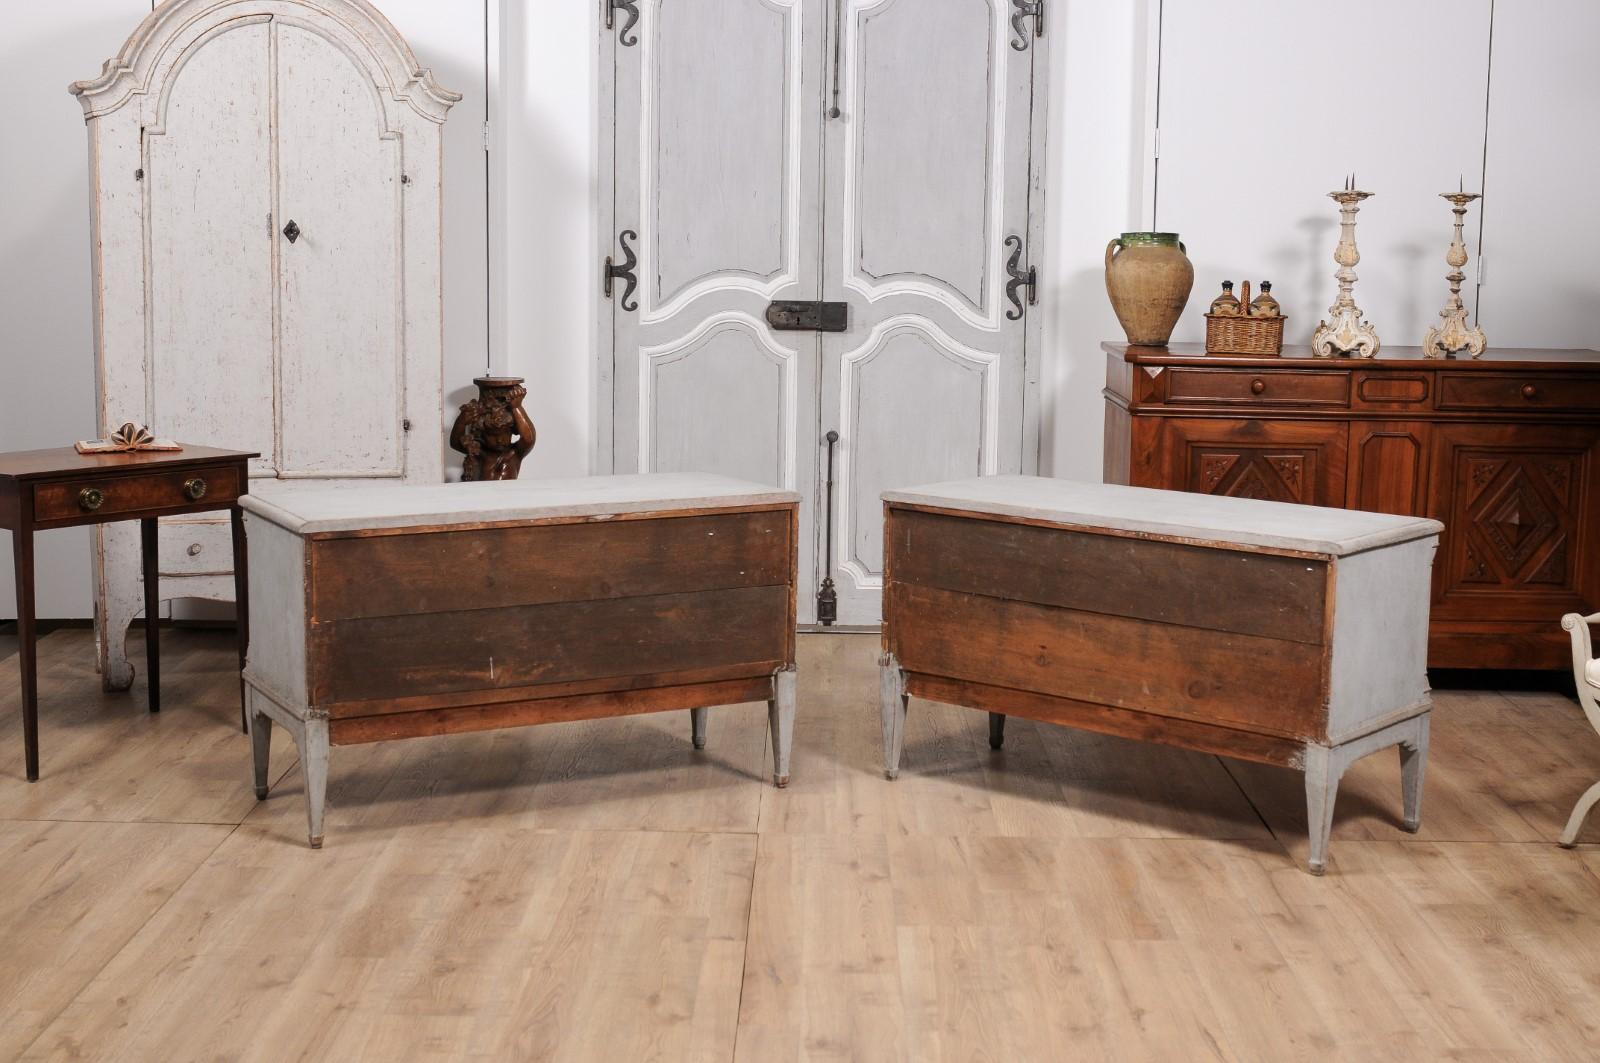 Danish 1820s Light Gray Painted Two-Drawer Chests with Semi-Columns, a Pair For Sale 3